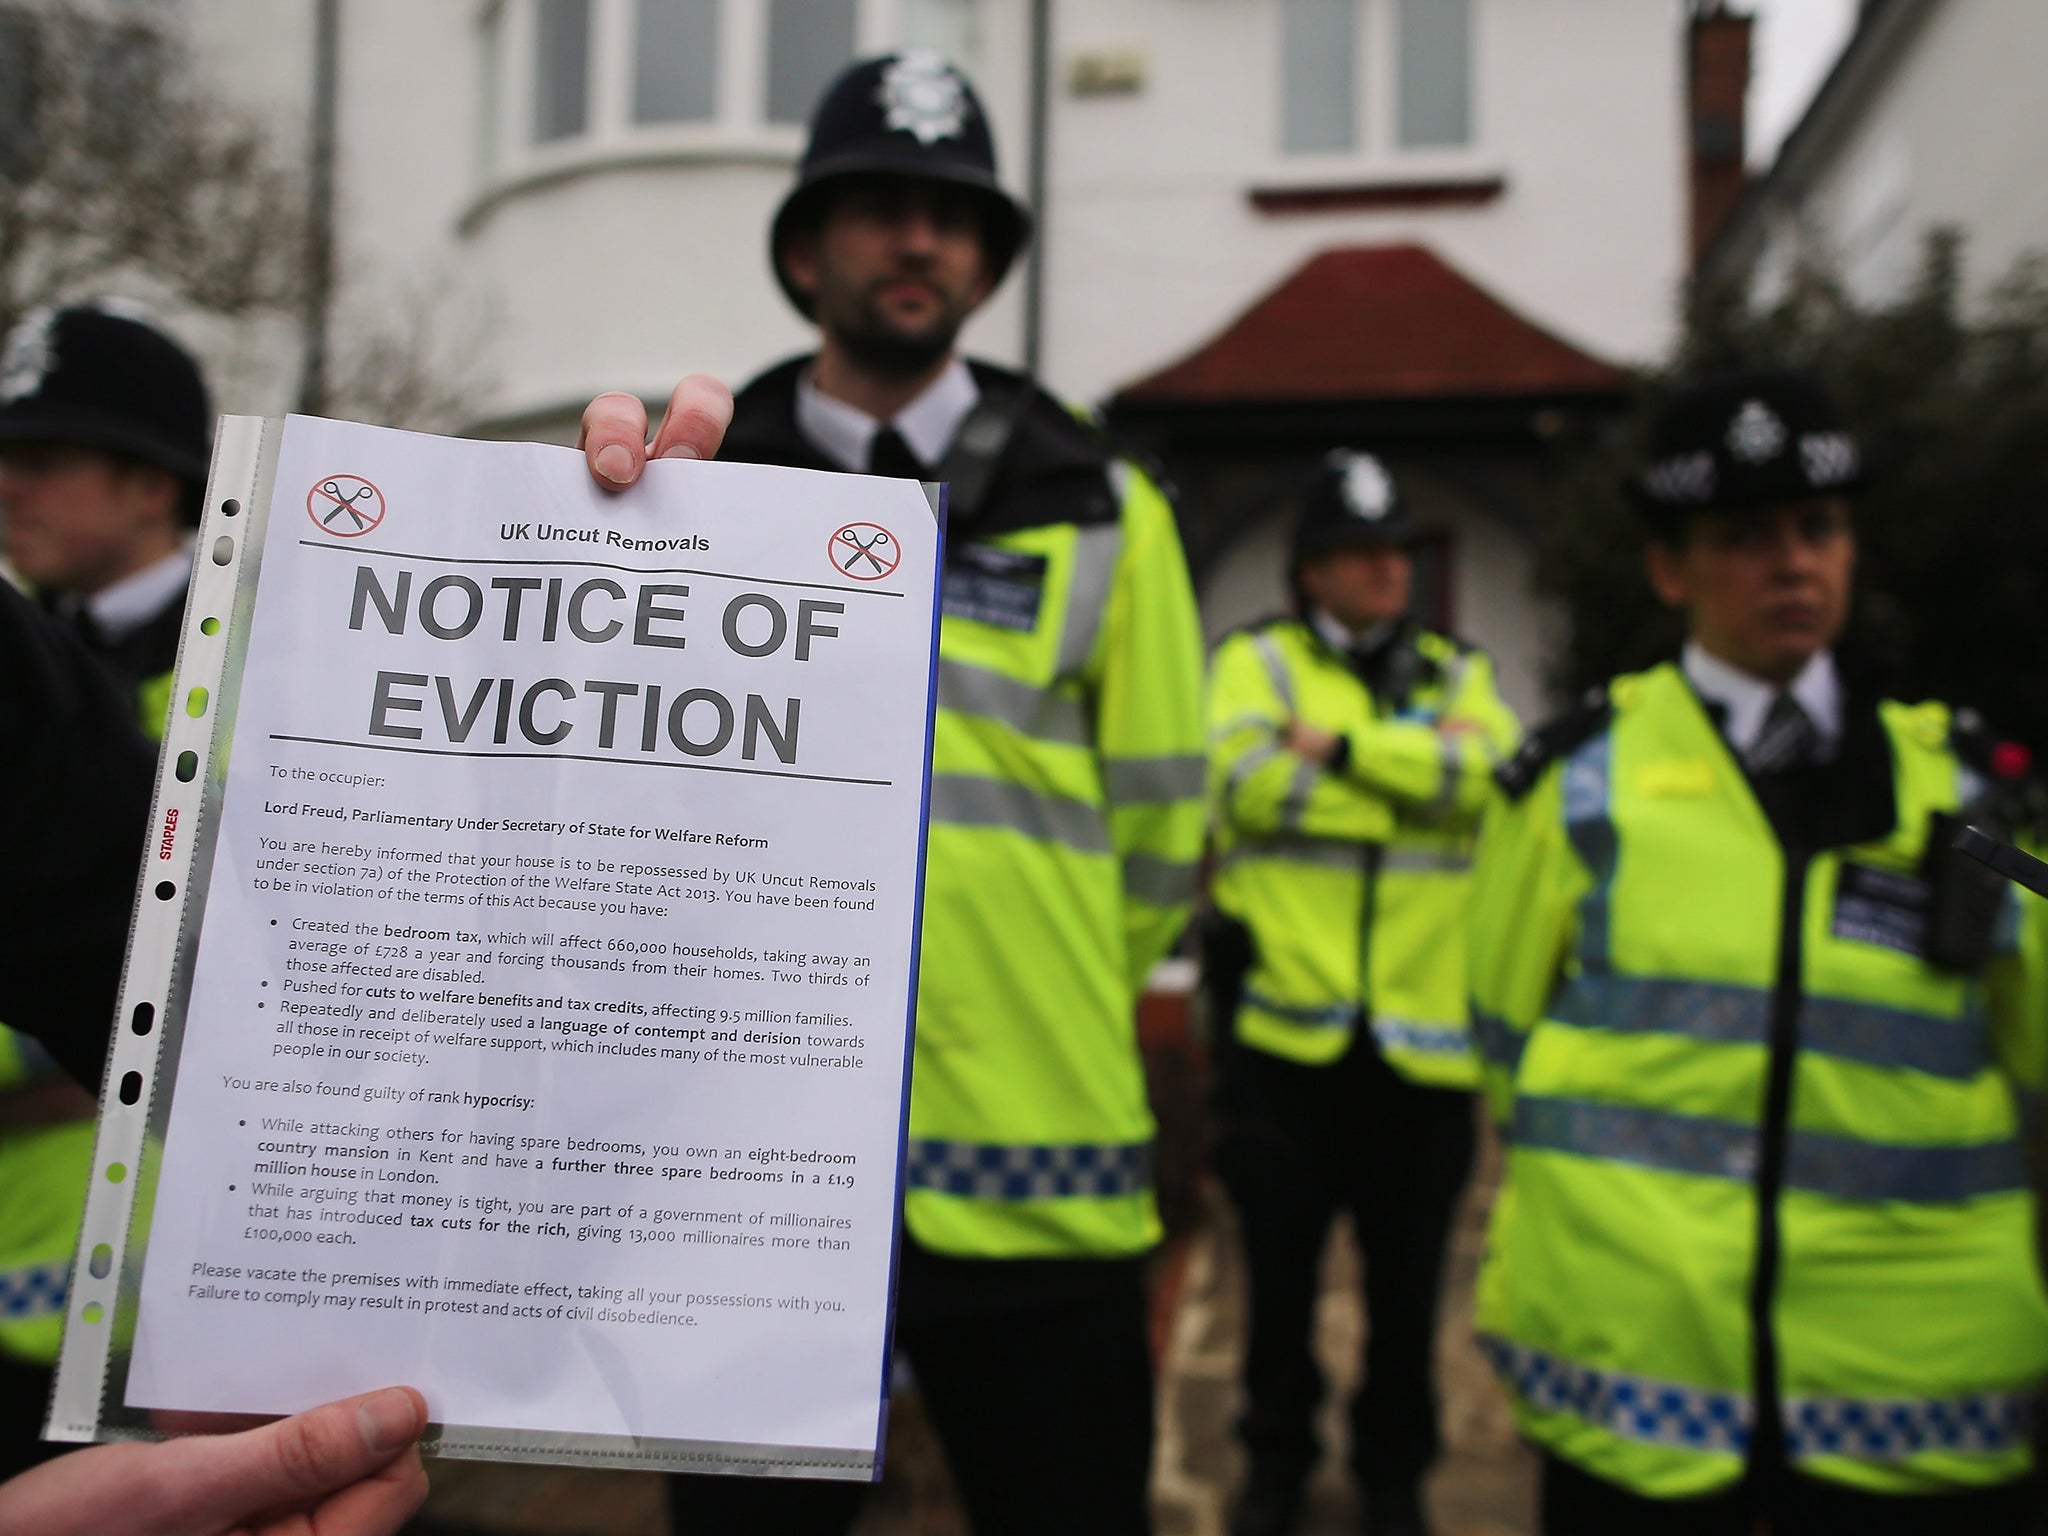 250 renters were evicted every day in 2015